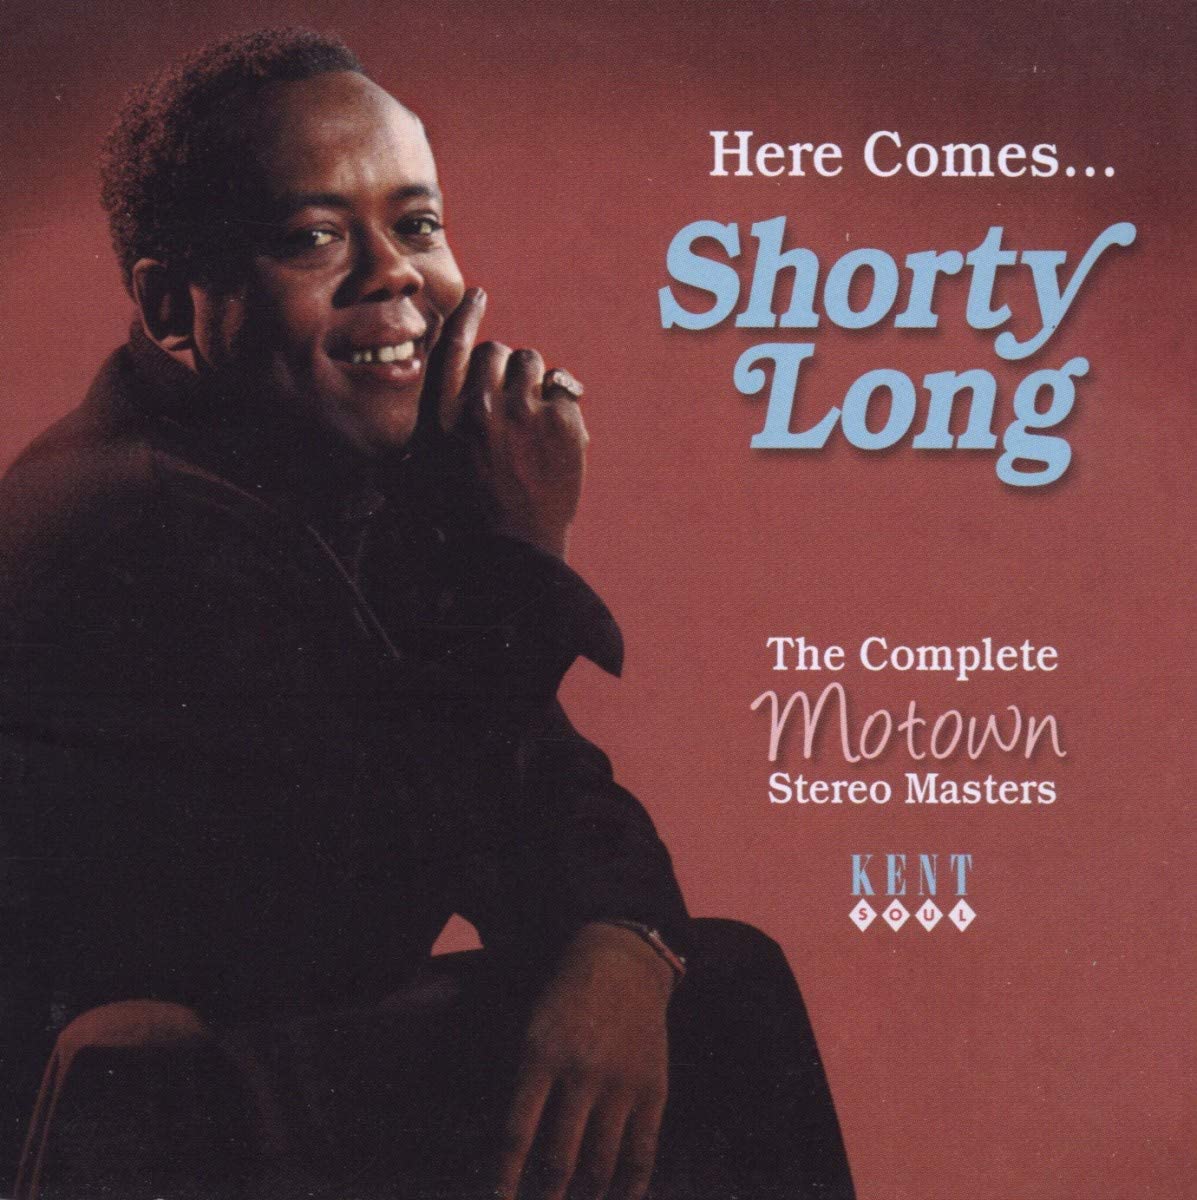 Shorty Long - Here Comes Shorty Long: Complete Motown Stereo Masters - CD